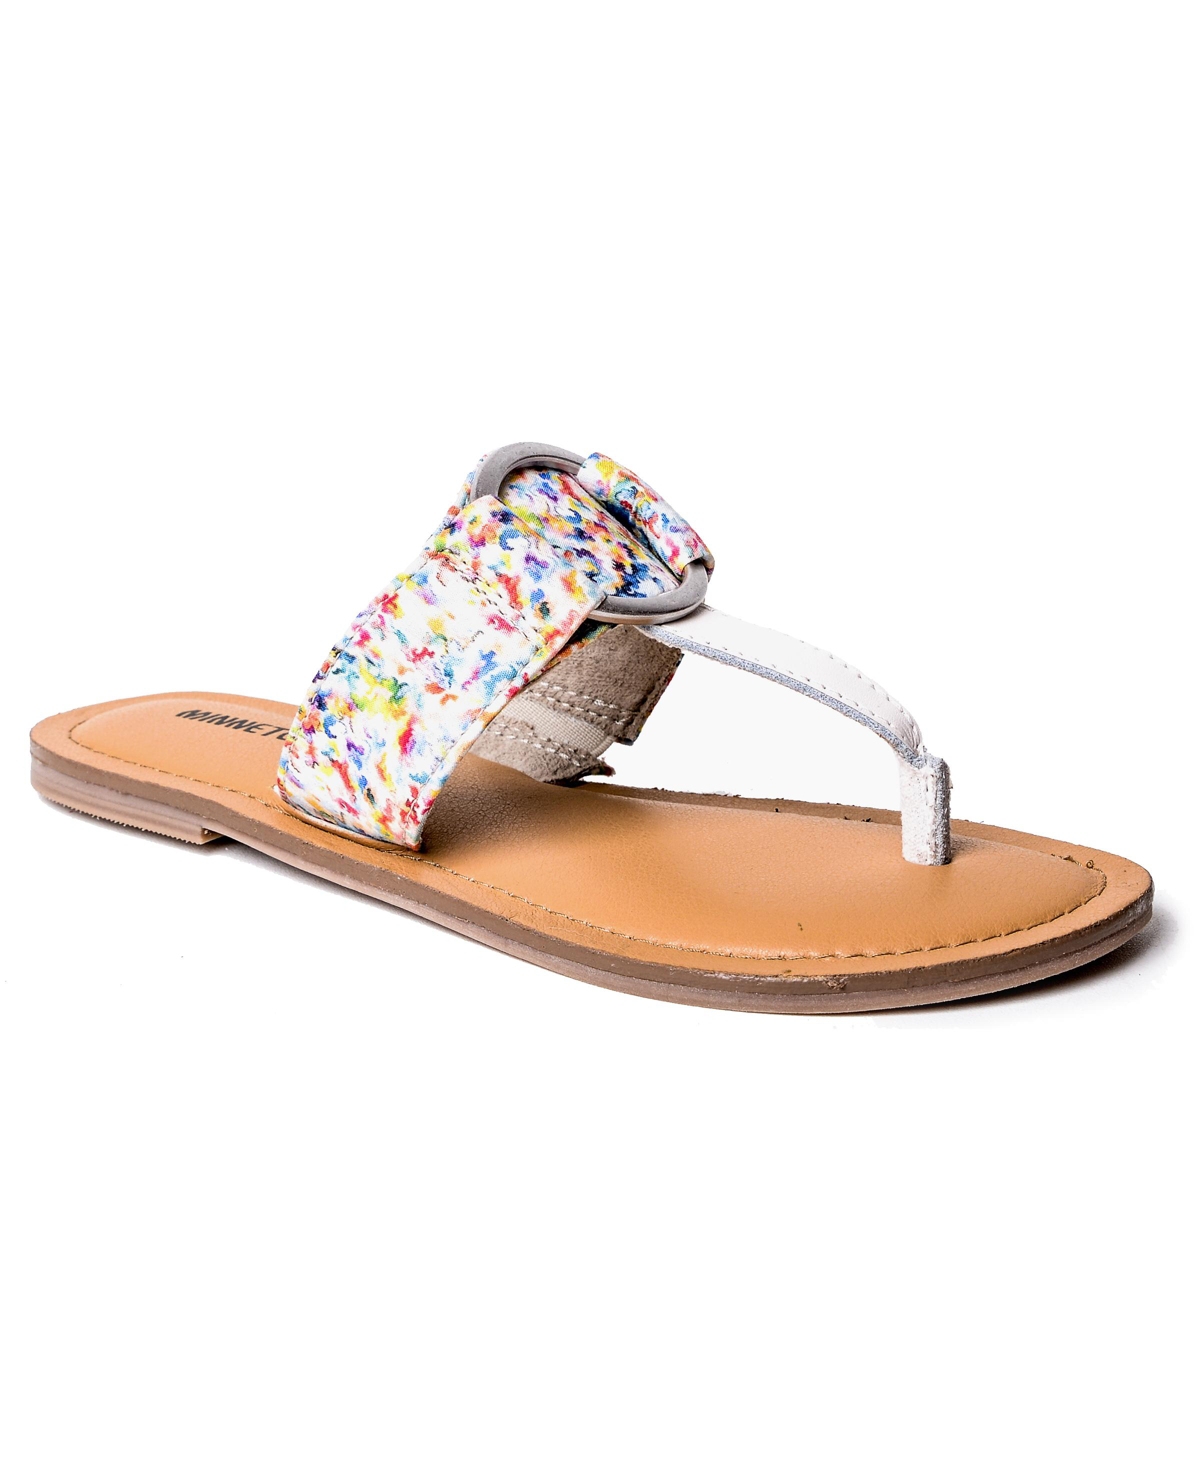 Women's Fairlea Thong Sandals - Simply taupe